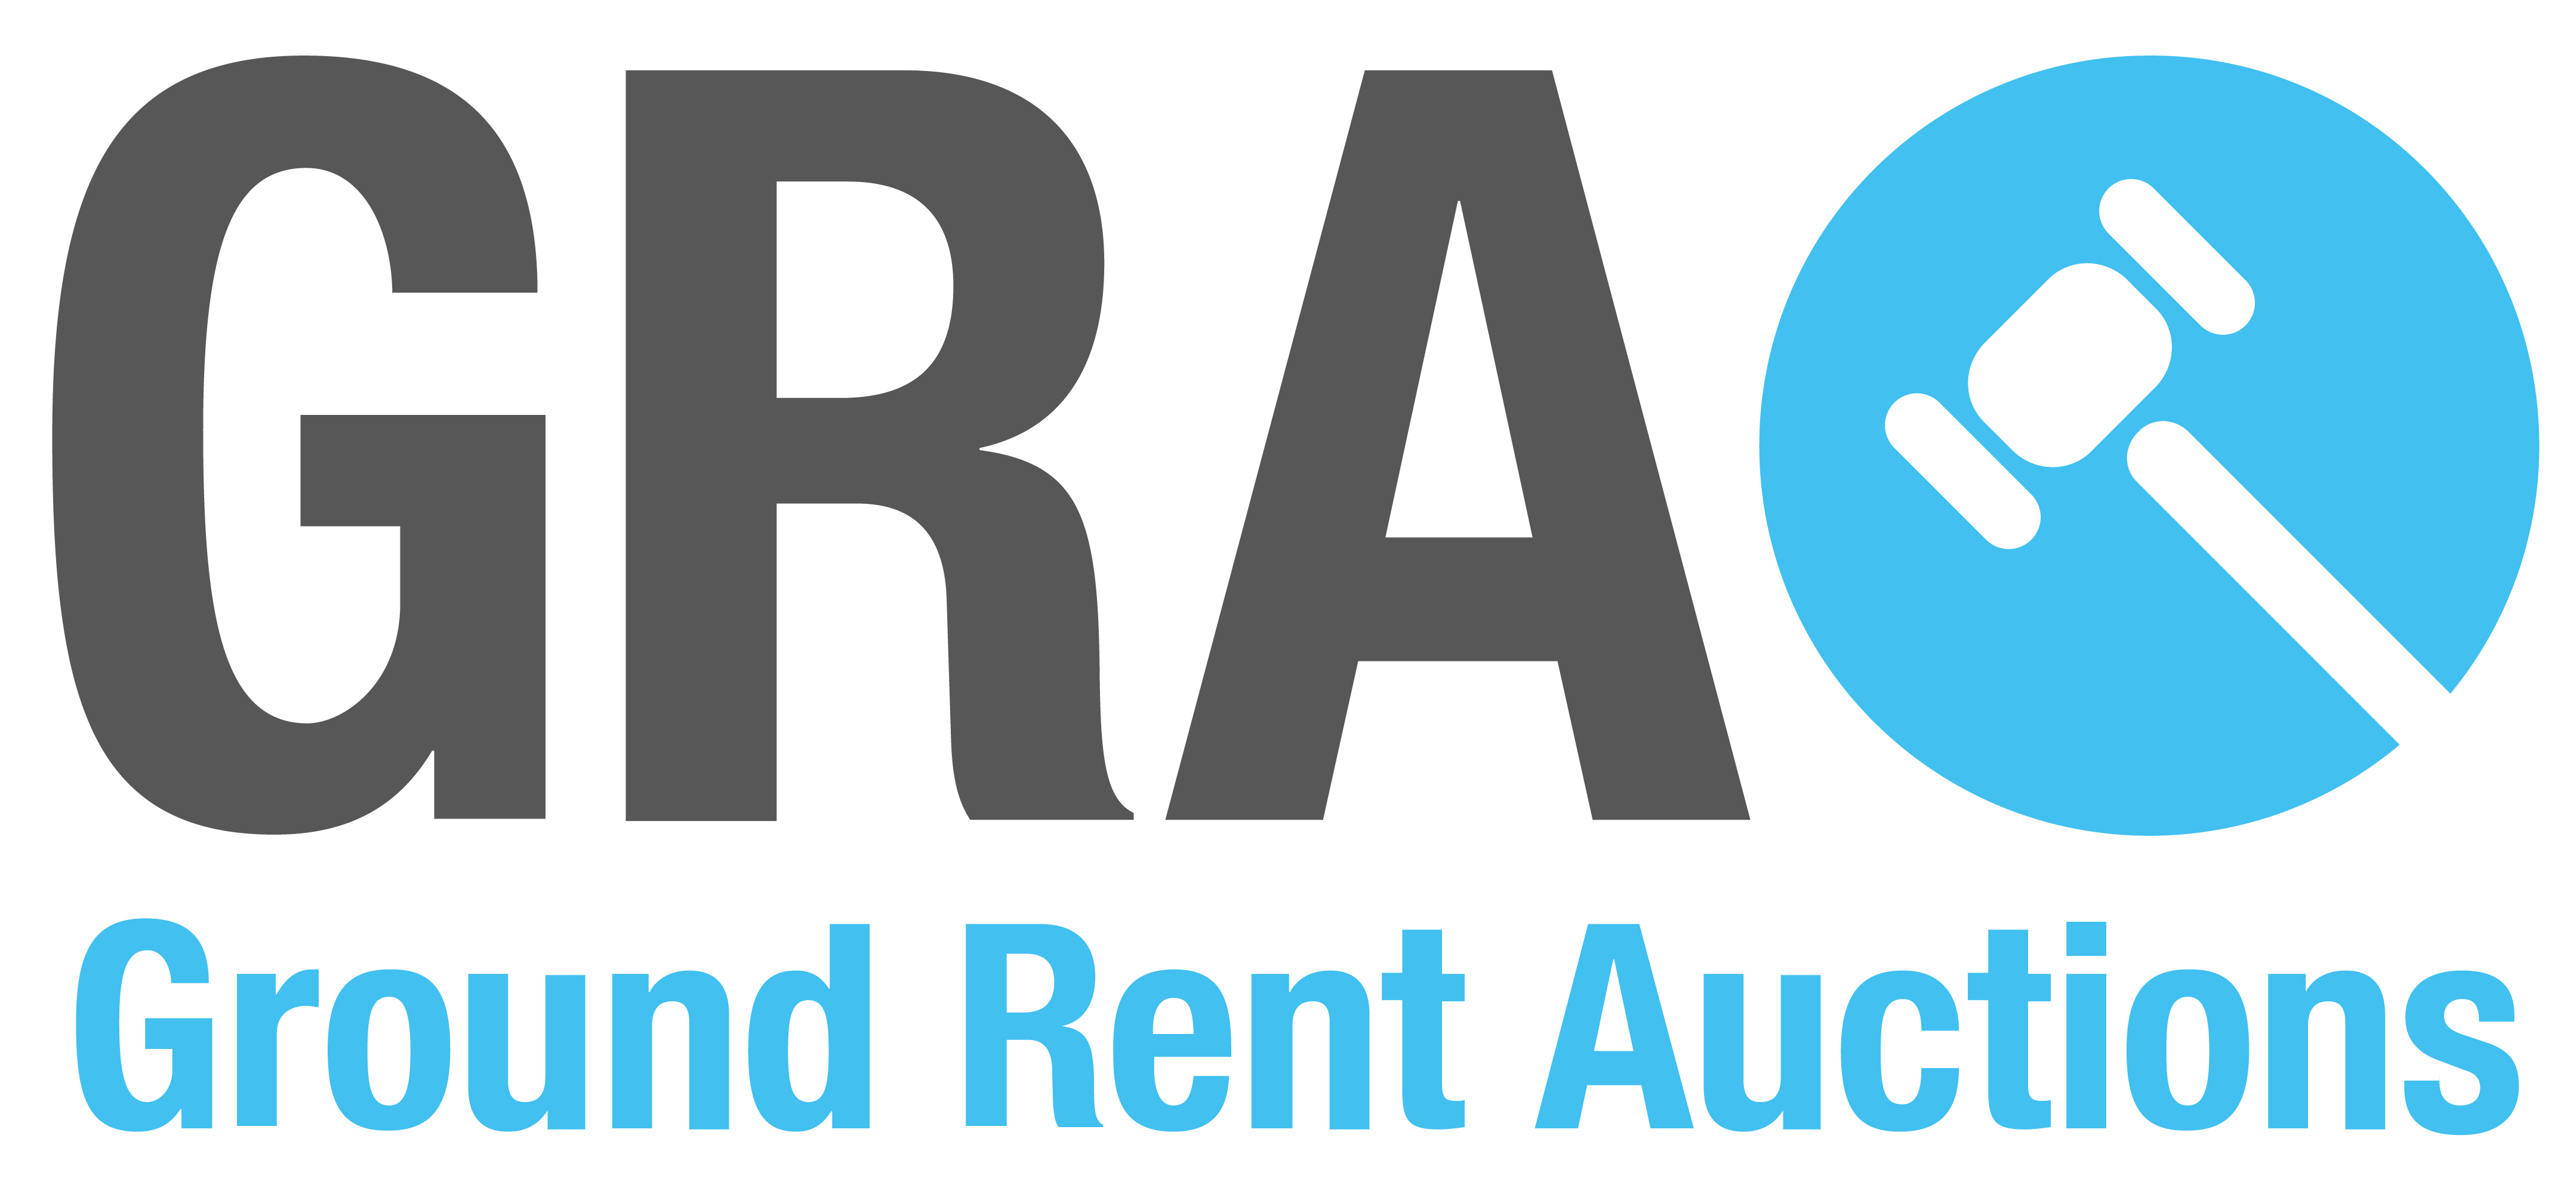 Please contact Ground Rent Auctions on 020 3987 0139.